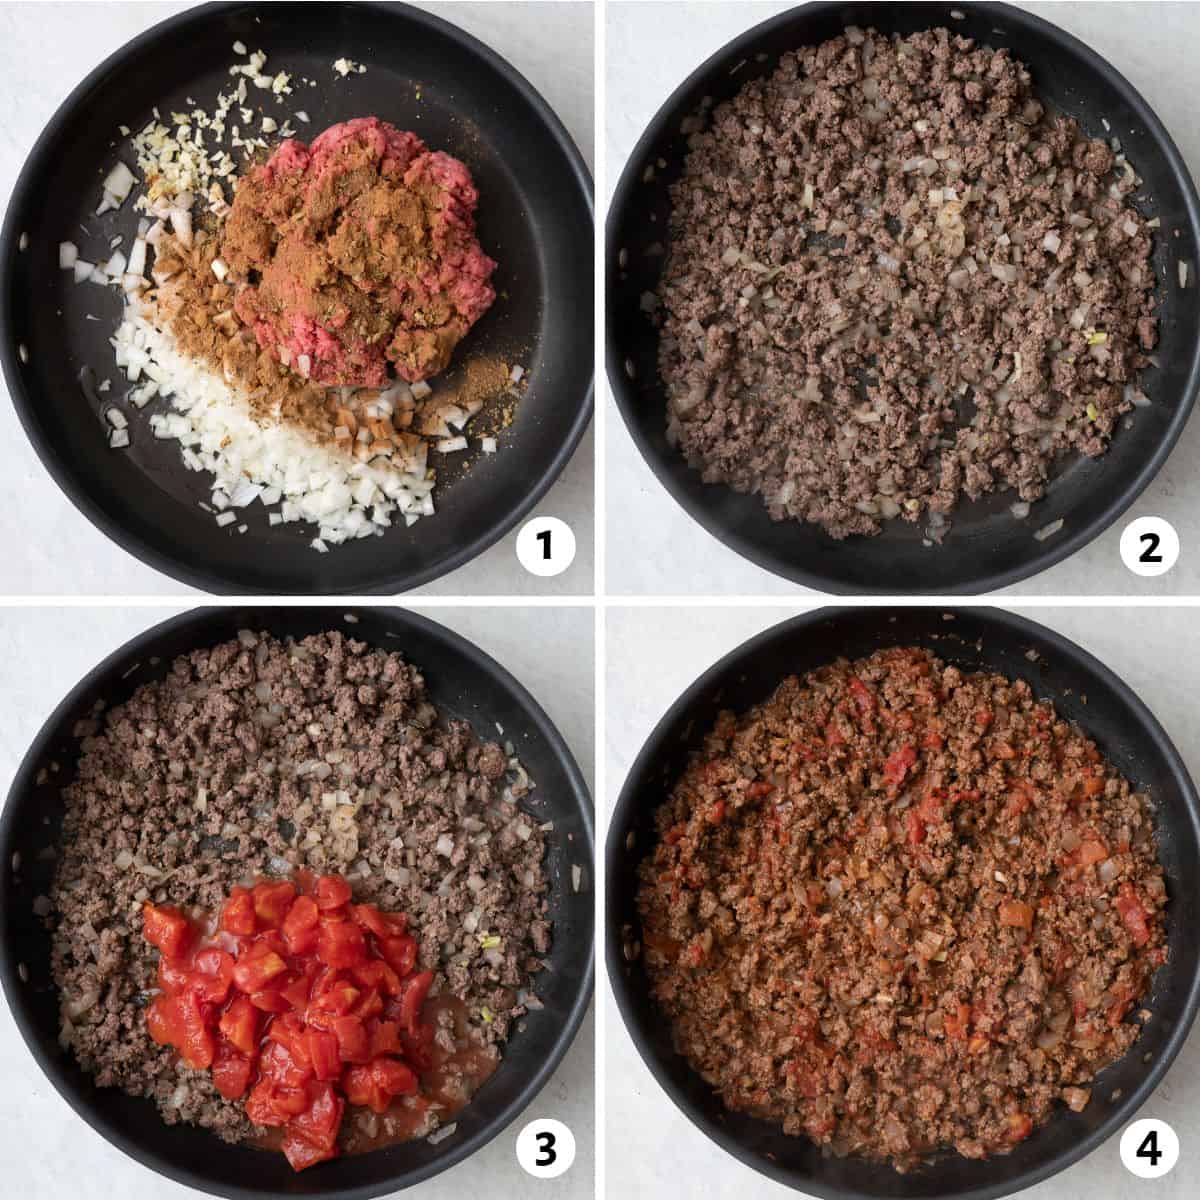 4 image collage preparing beef layer: 1- onions, ground beef, and garlic in a skillet seasoned with oregano, cinnamon salt and pepper before cooking, 2- ground beef mixture after cooking, 3-diced tomatoes added, 4- sauce after thickening.